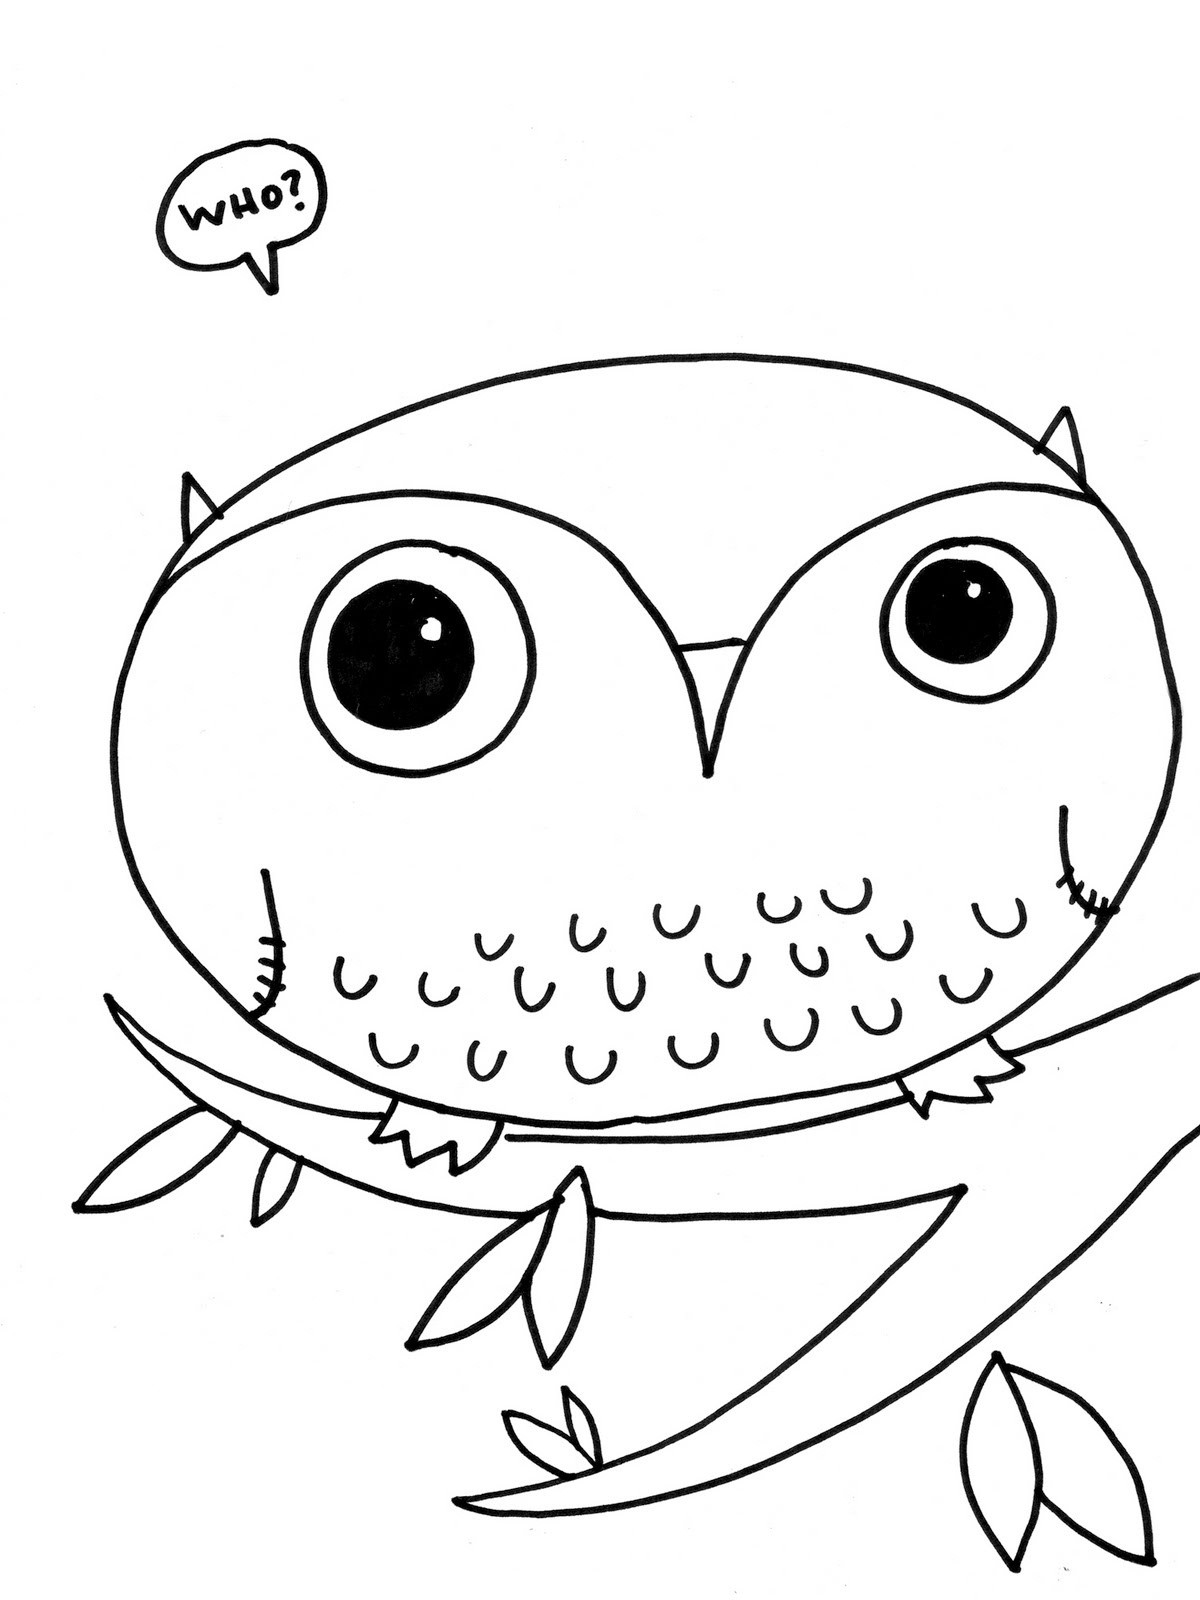 Owl Coloring Pages For Kids
 embroidery on Pinterest